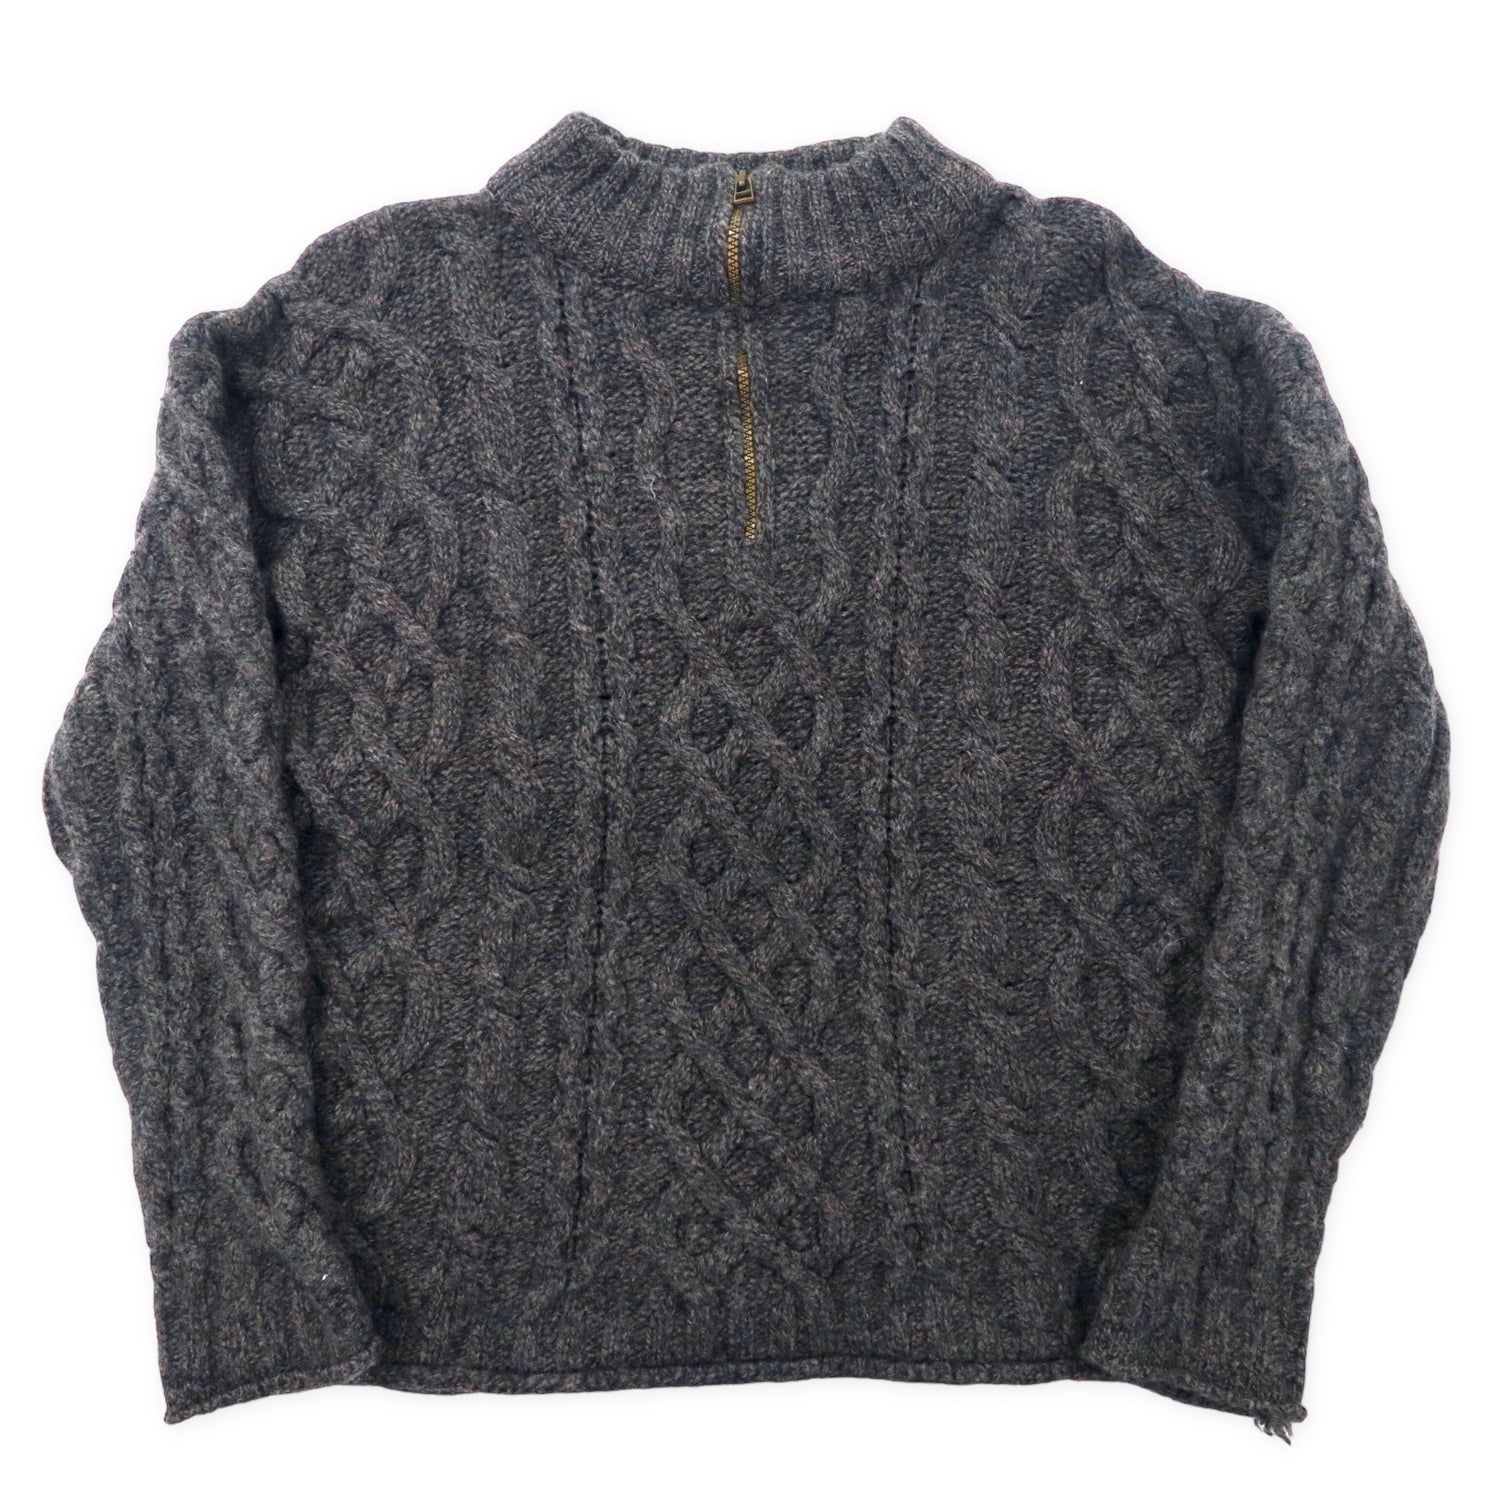 Pergrine MADE Half Zip Fishermannit Alannit Sweater M Gray Wool